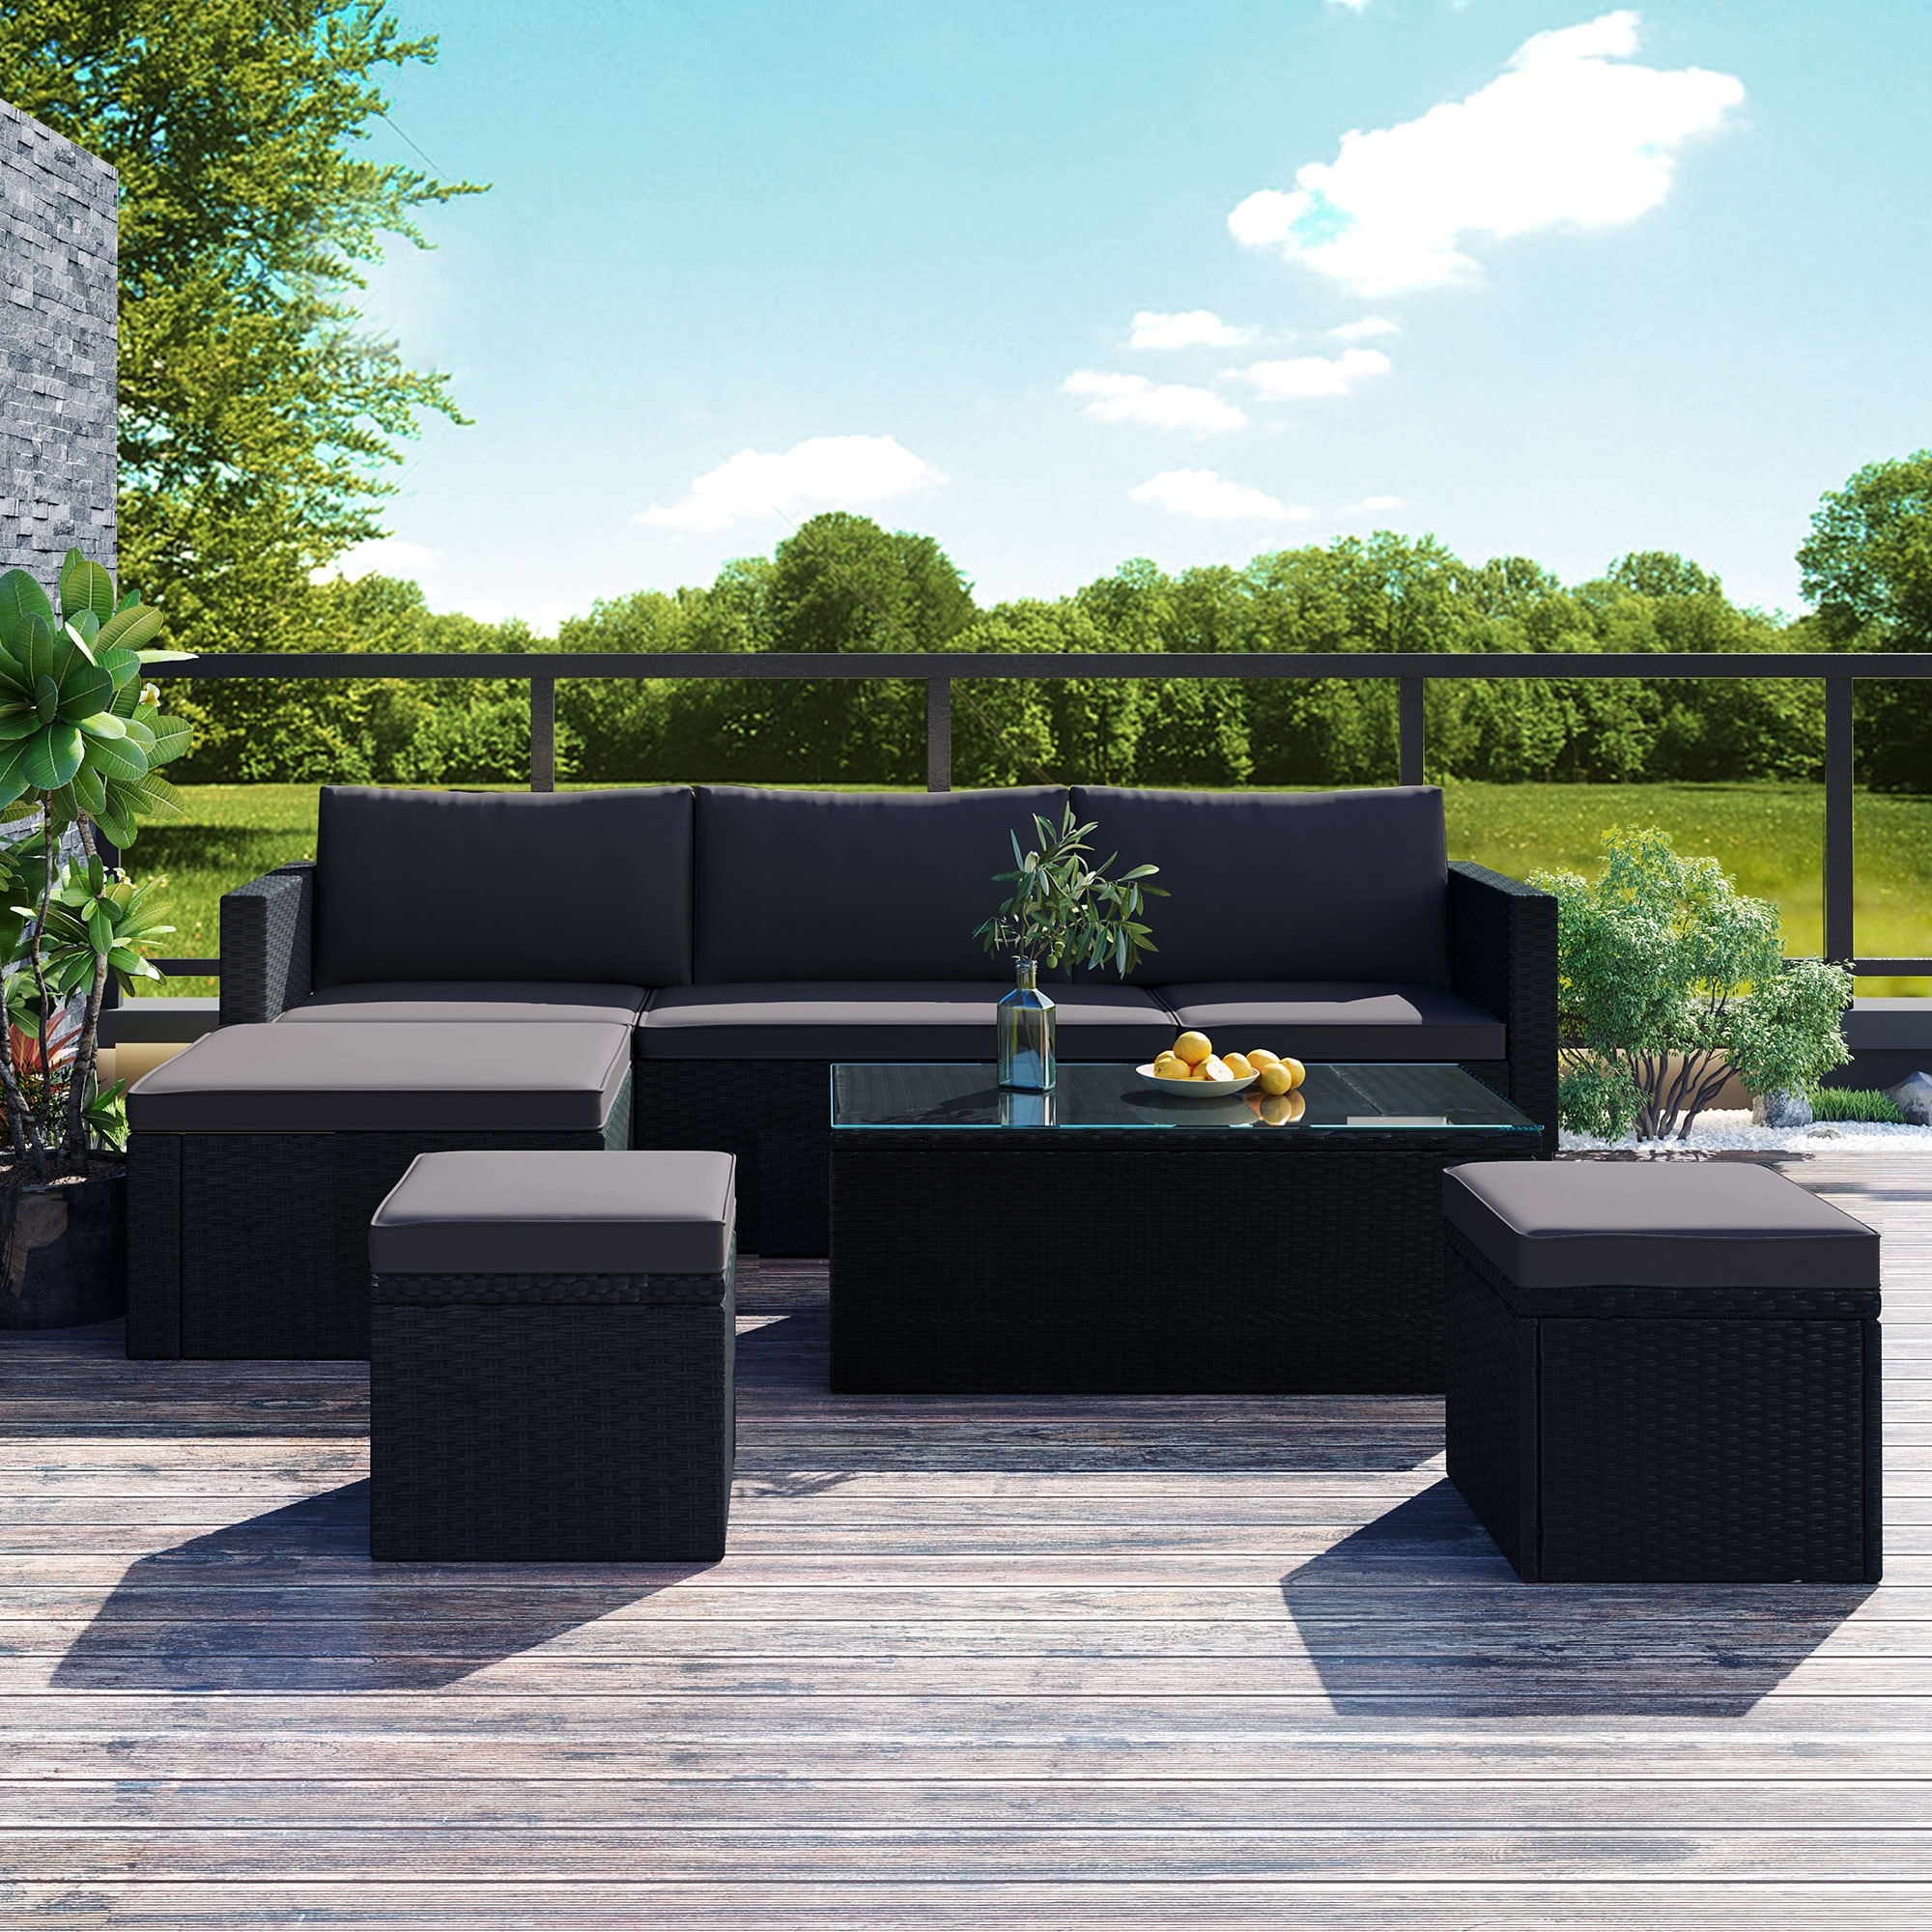 Large Outdoor Wicker Sofa Set  Pe Rattan  Movable Cushion  Sectional Lounger Sofa.